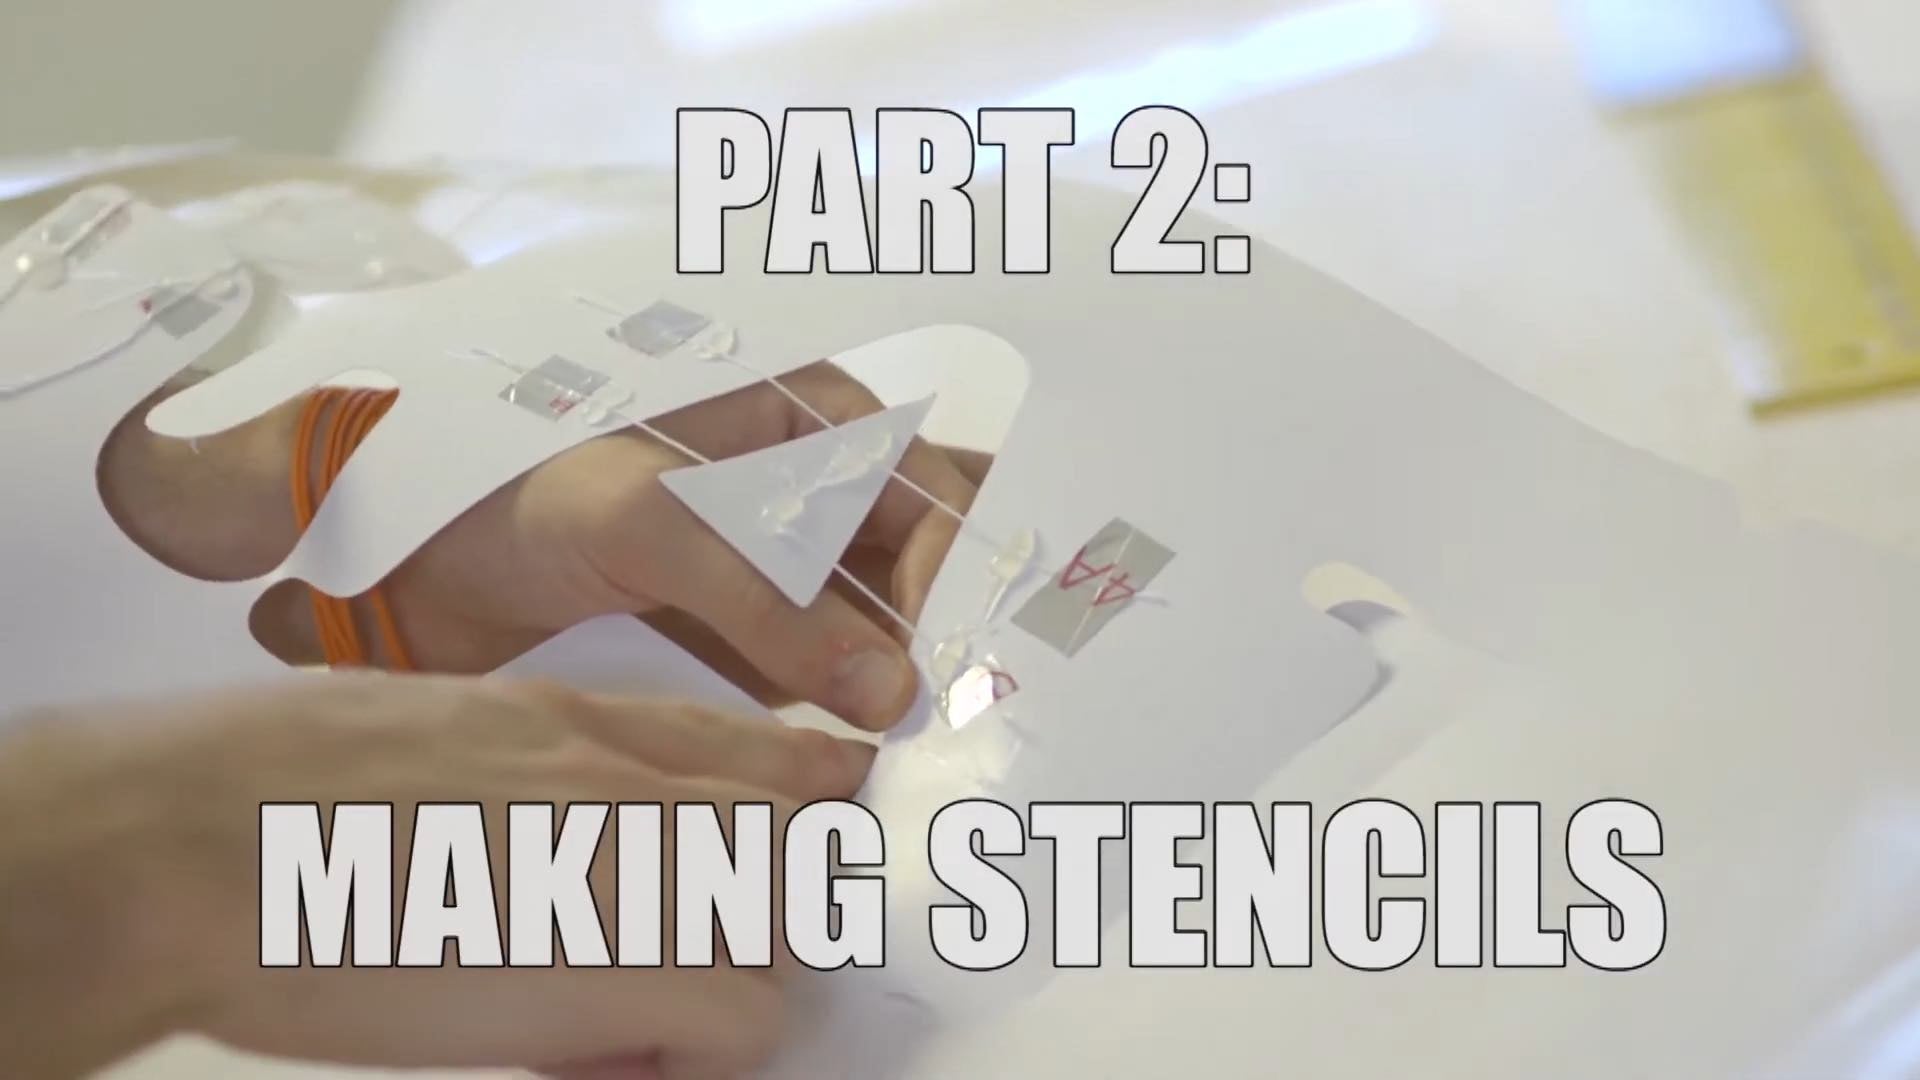 Load video: Video 2 of 4: Making Stencils